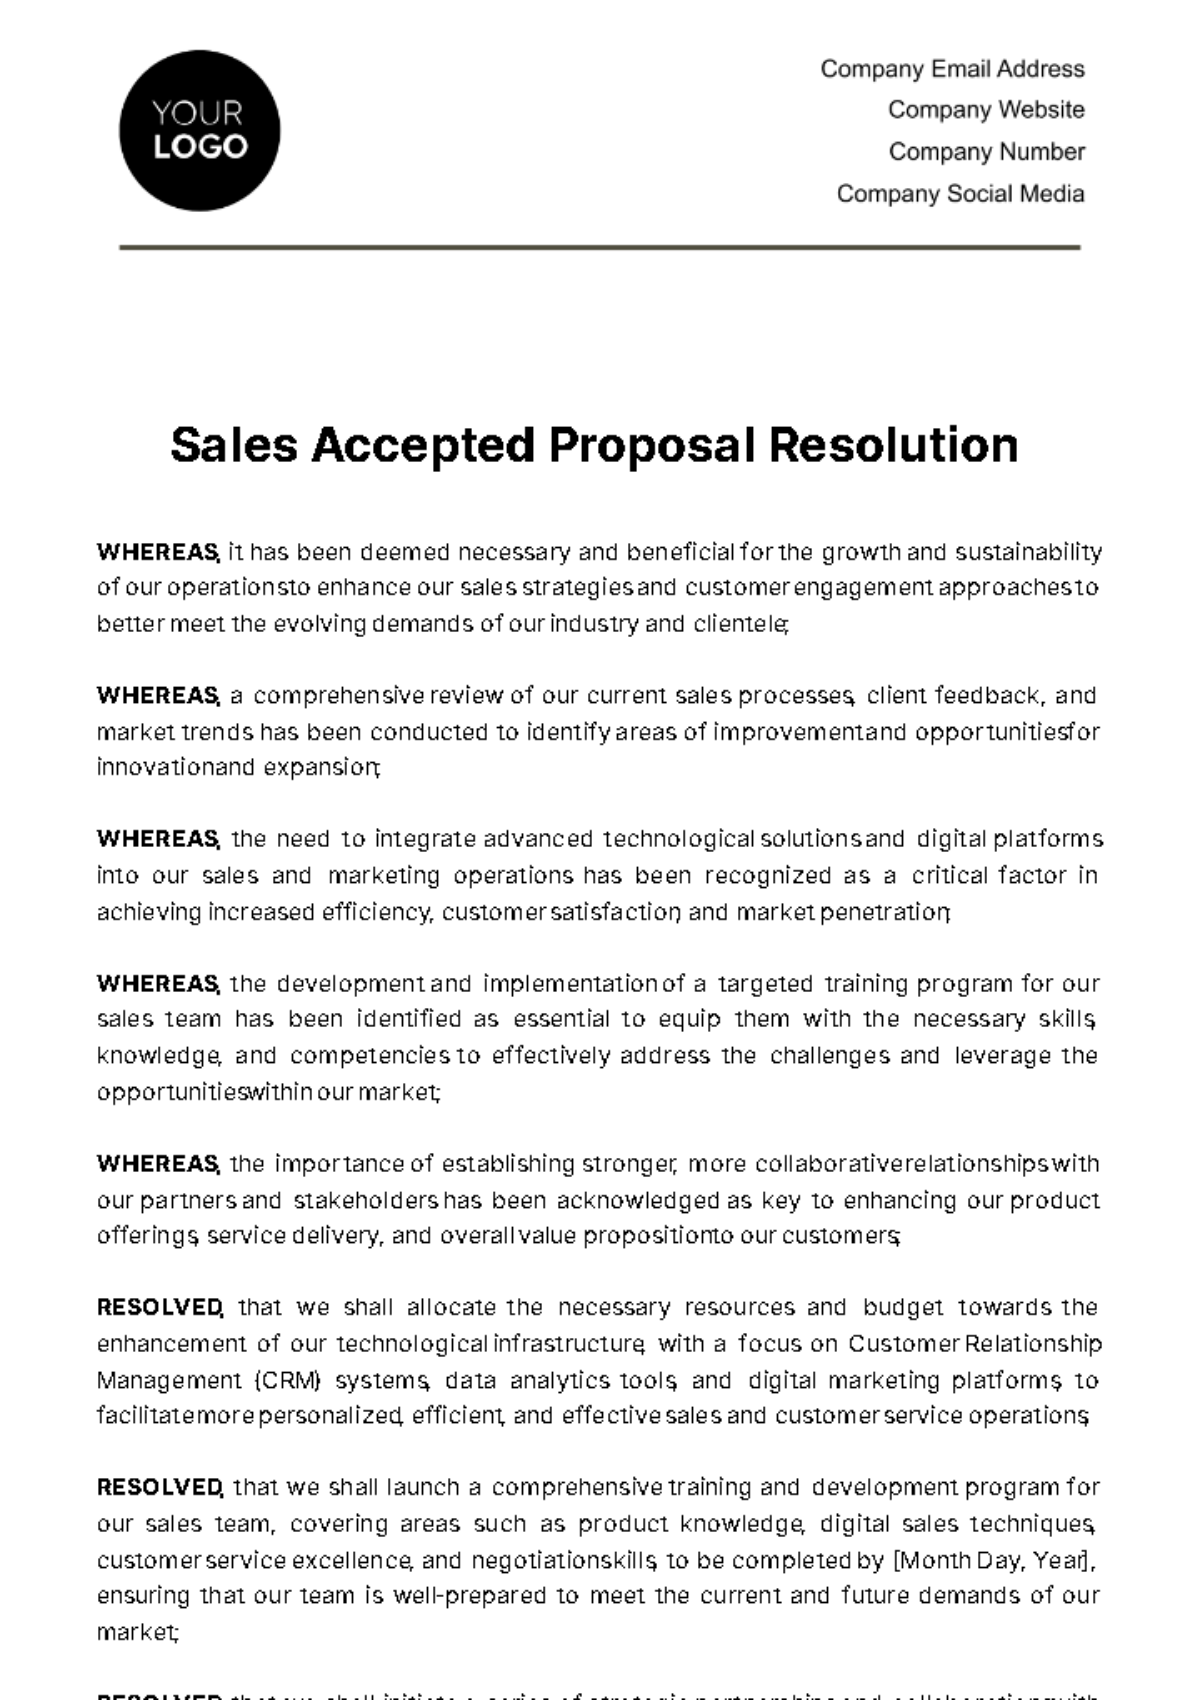 Free Sales Accepted Proposal Resolution Template